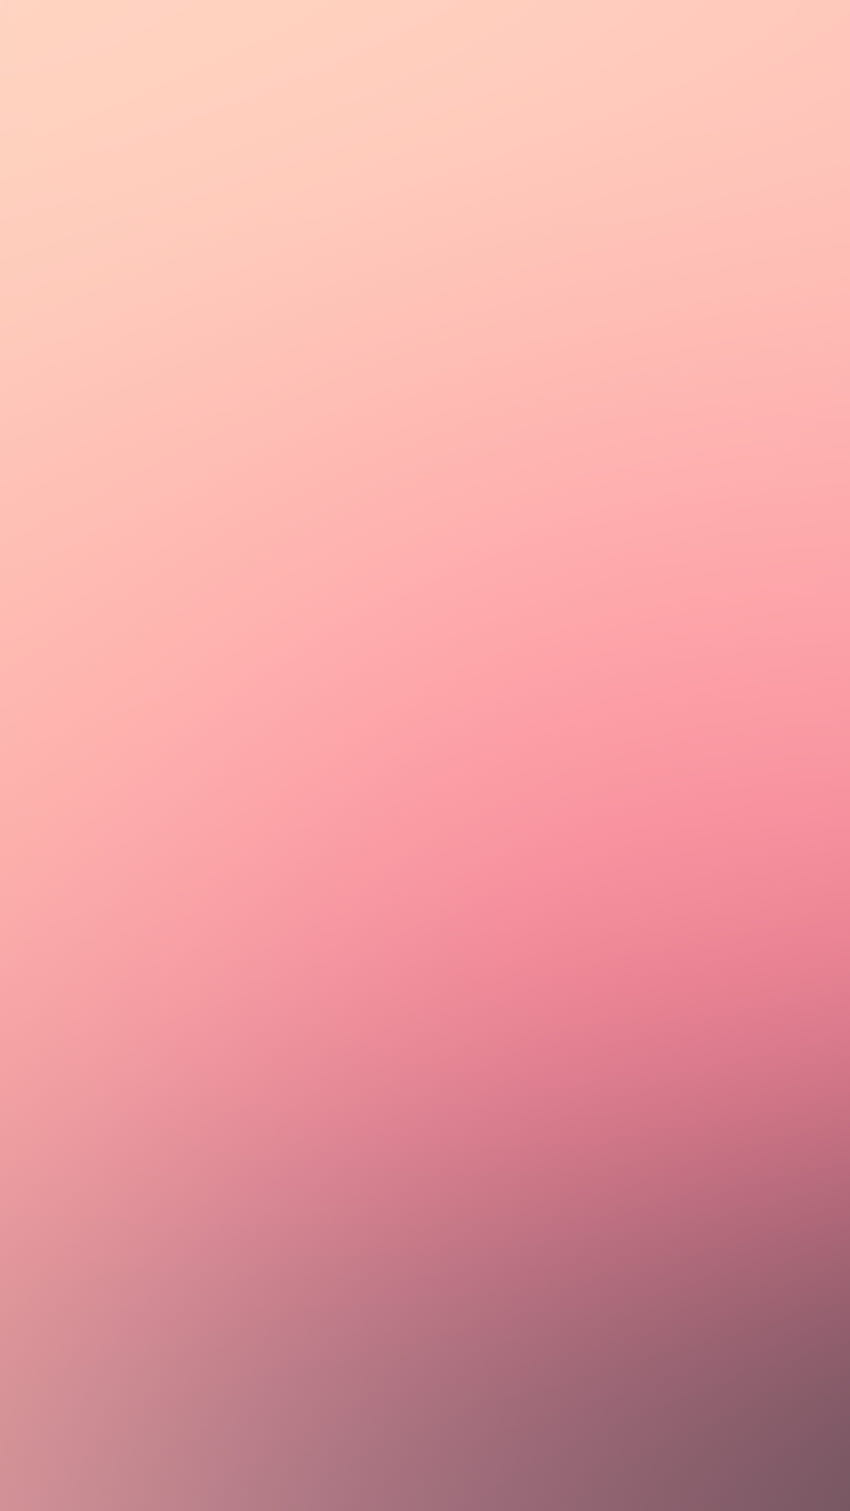 Rose Gold Cute Pink For Iphone, iphone 7 pink HD phone wallpaper